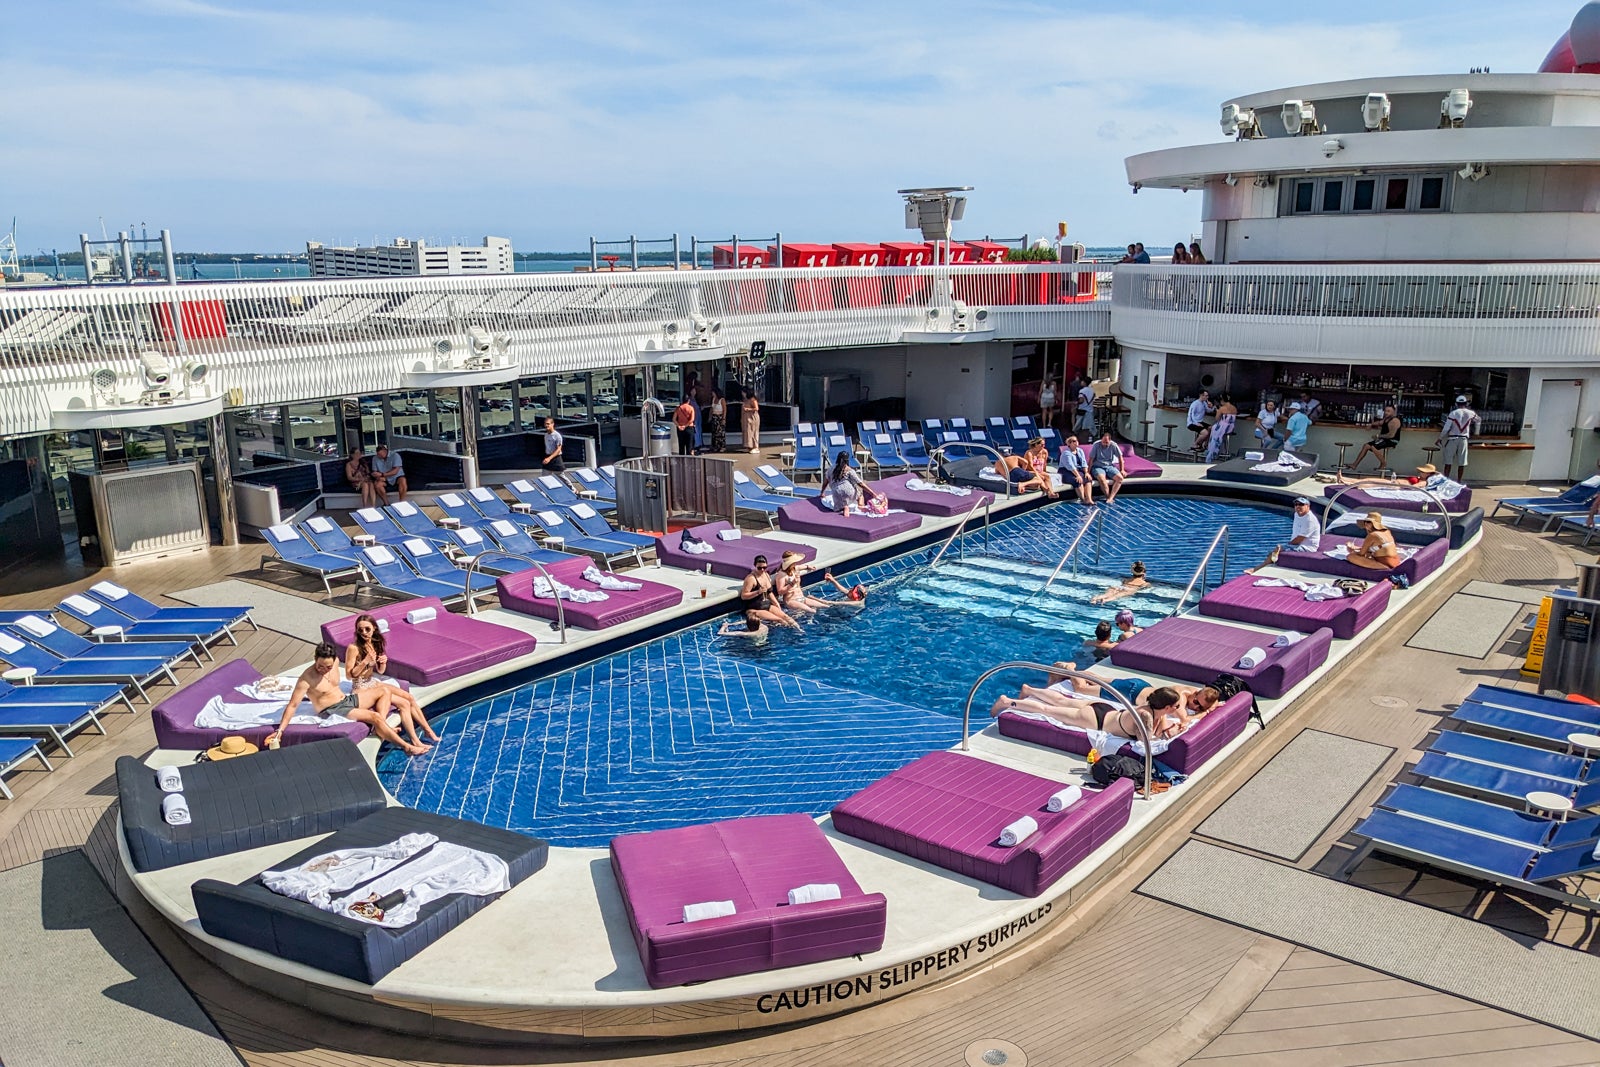 Pool surrounded by purple day beds on cruise ship